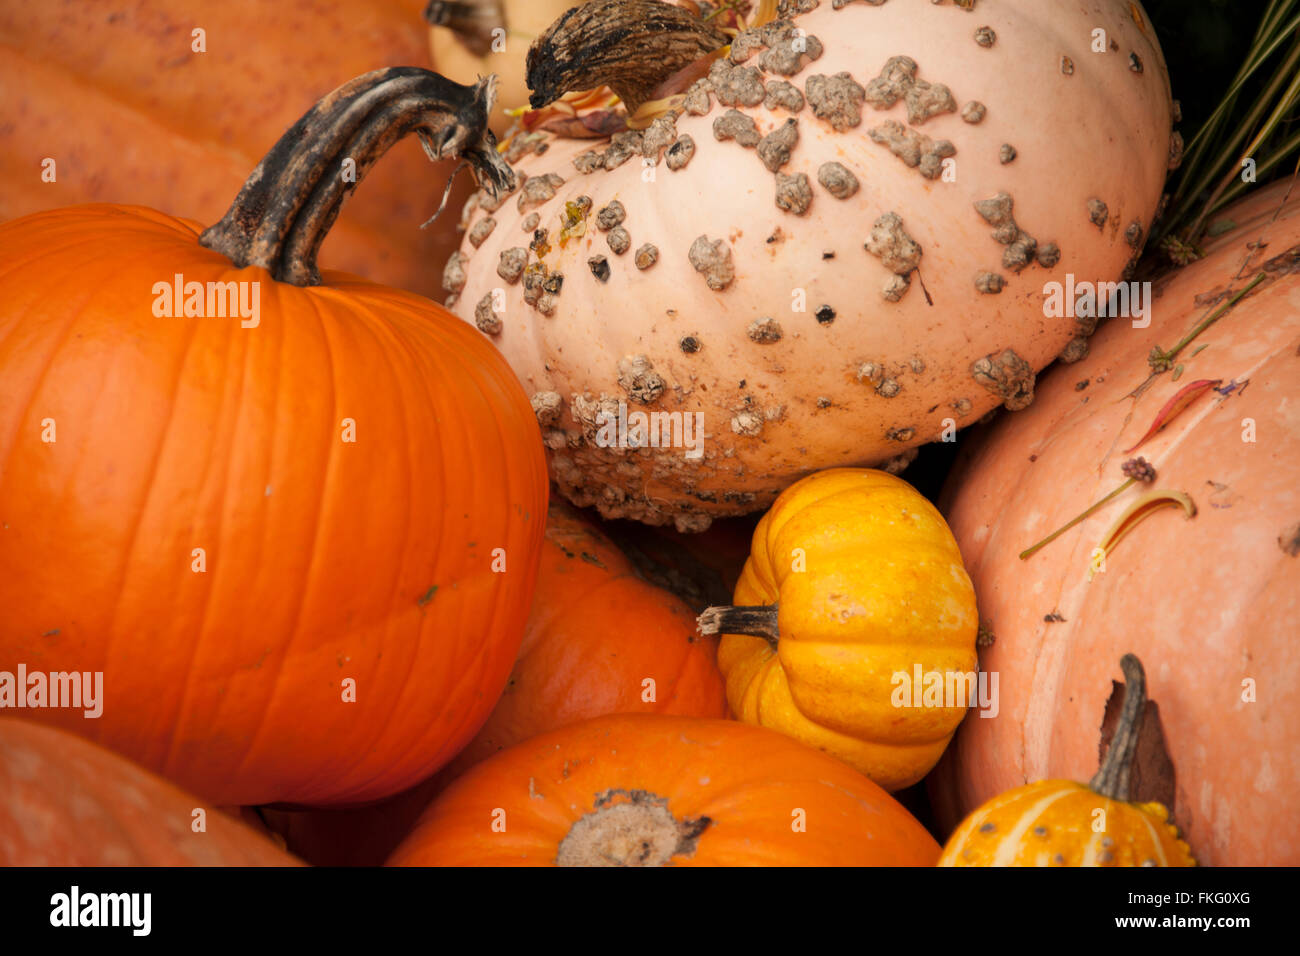 pumkins and gourds Stock Photo